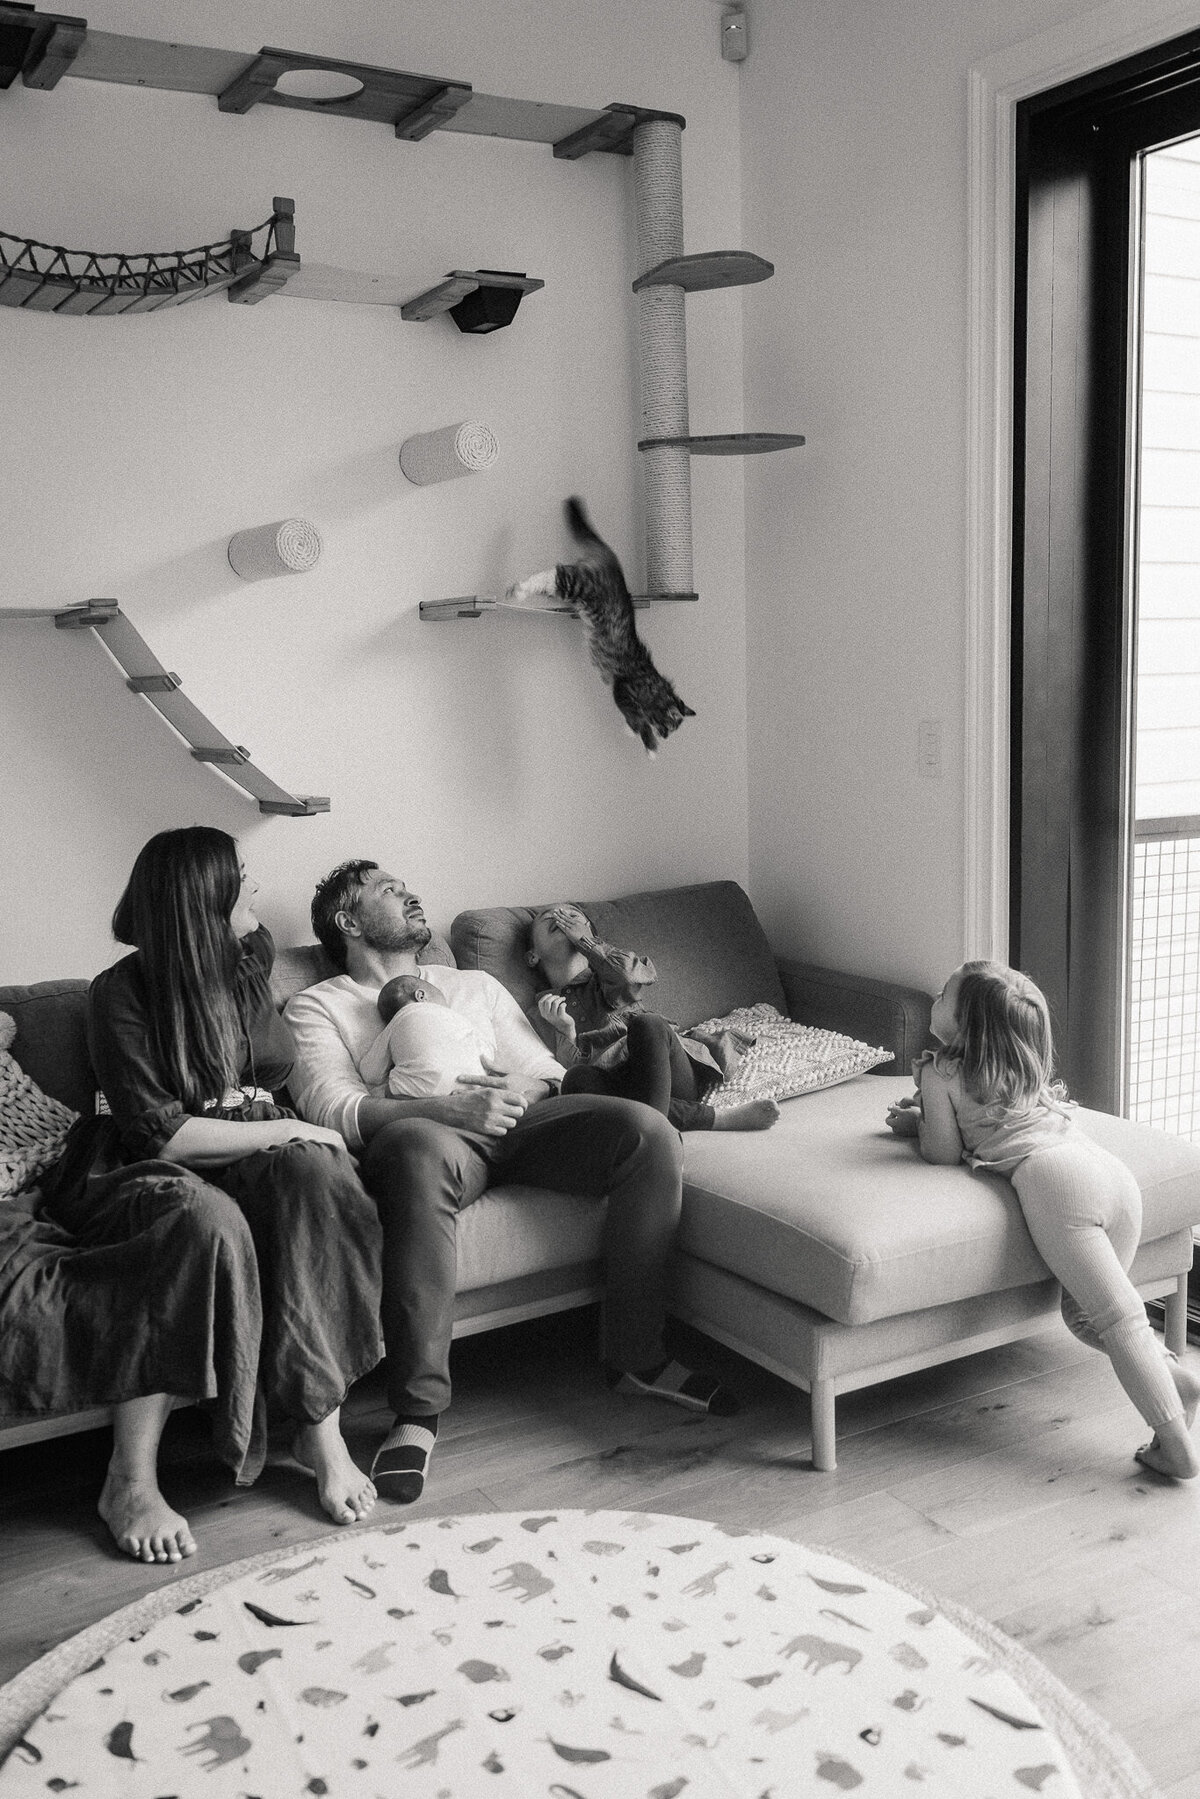 Candid moment of San Francisco family on couch with cat jumping at in home lifestyle photography session